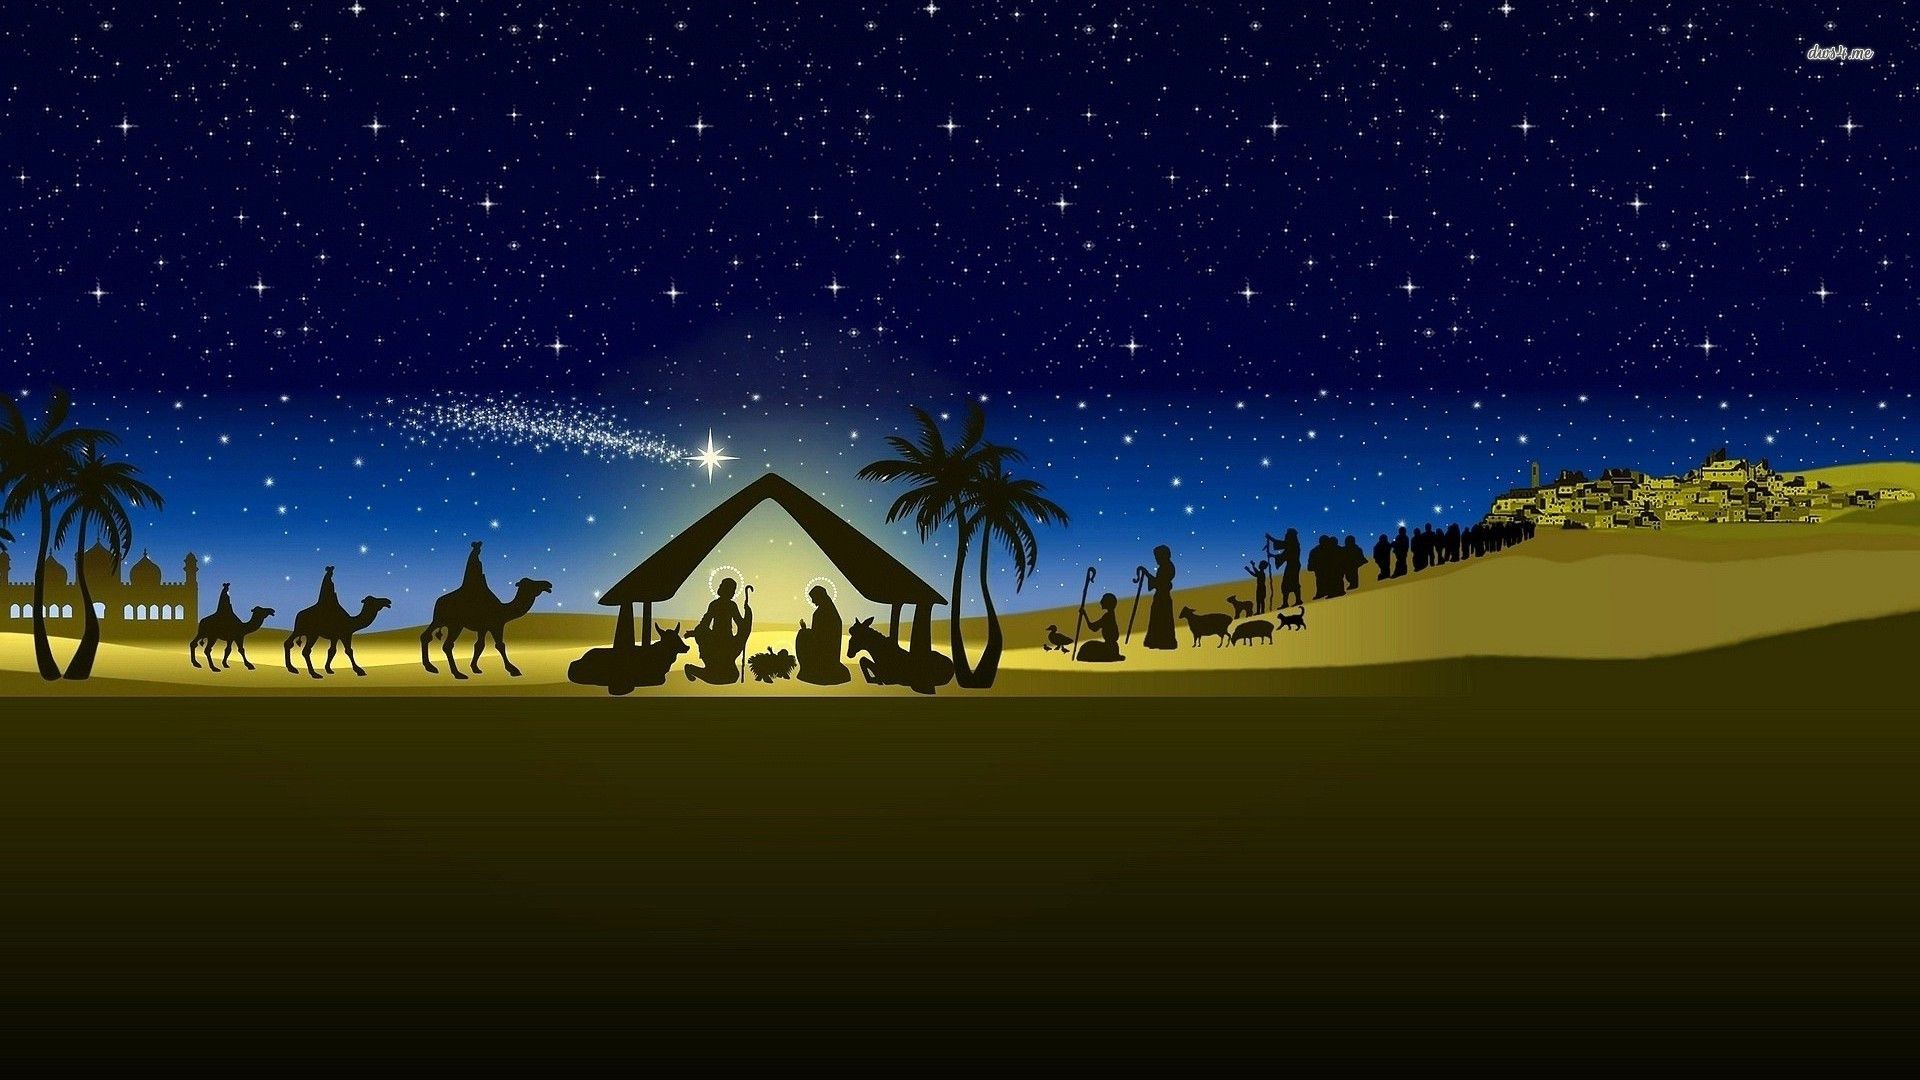 Nativity scene background pictures